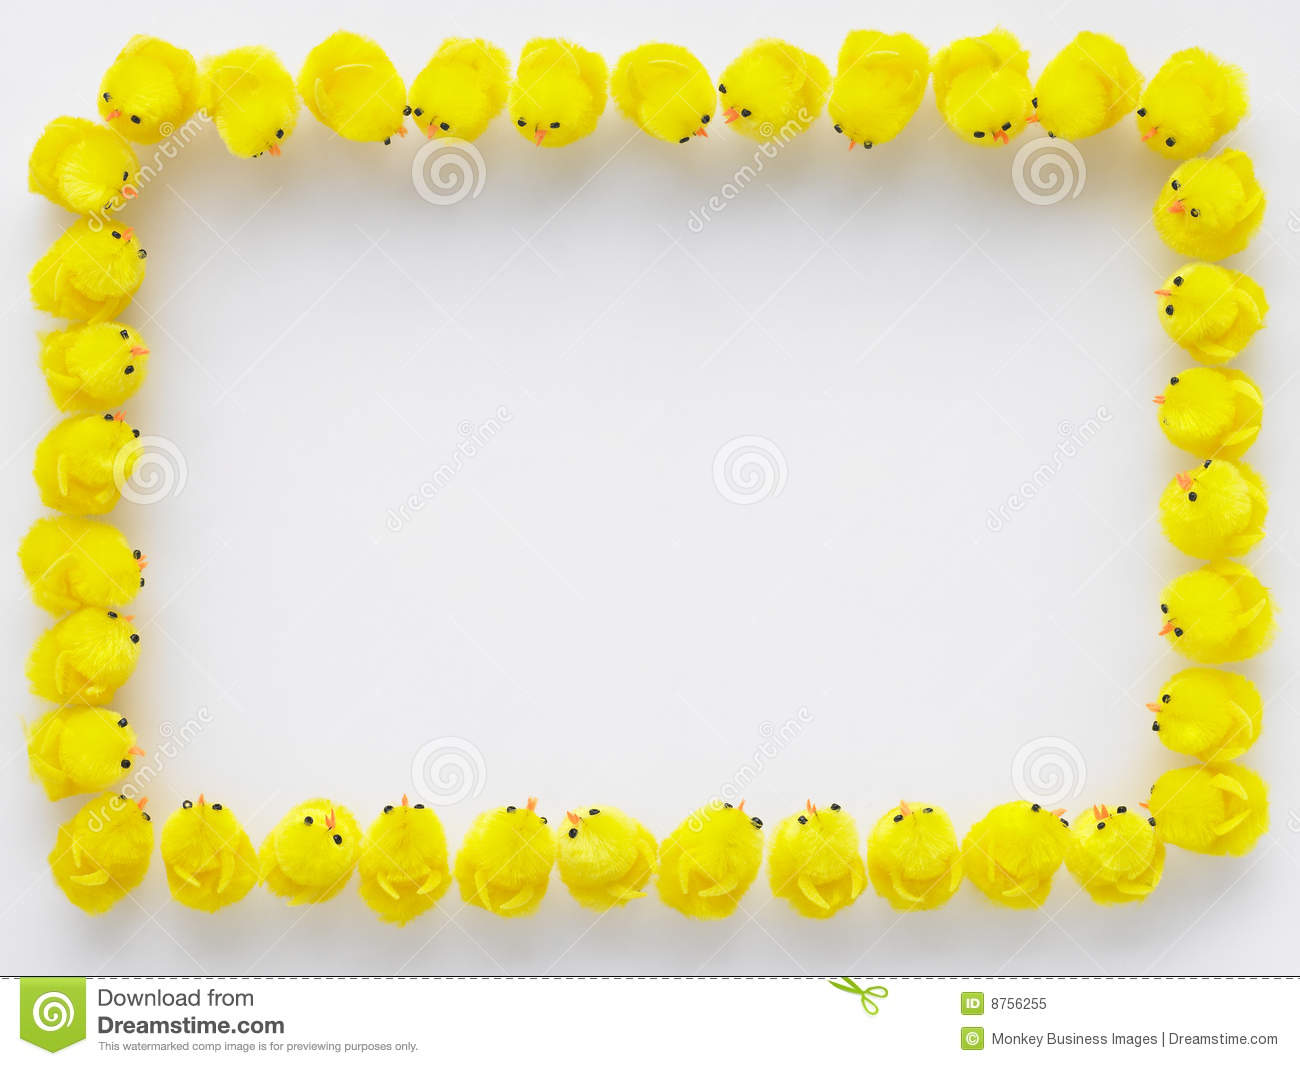 Border Made Of Easter Chicks Royalty Free Stock Photo   Image  8756255